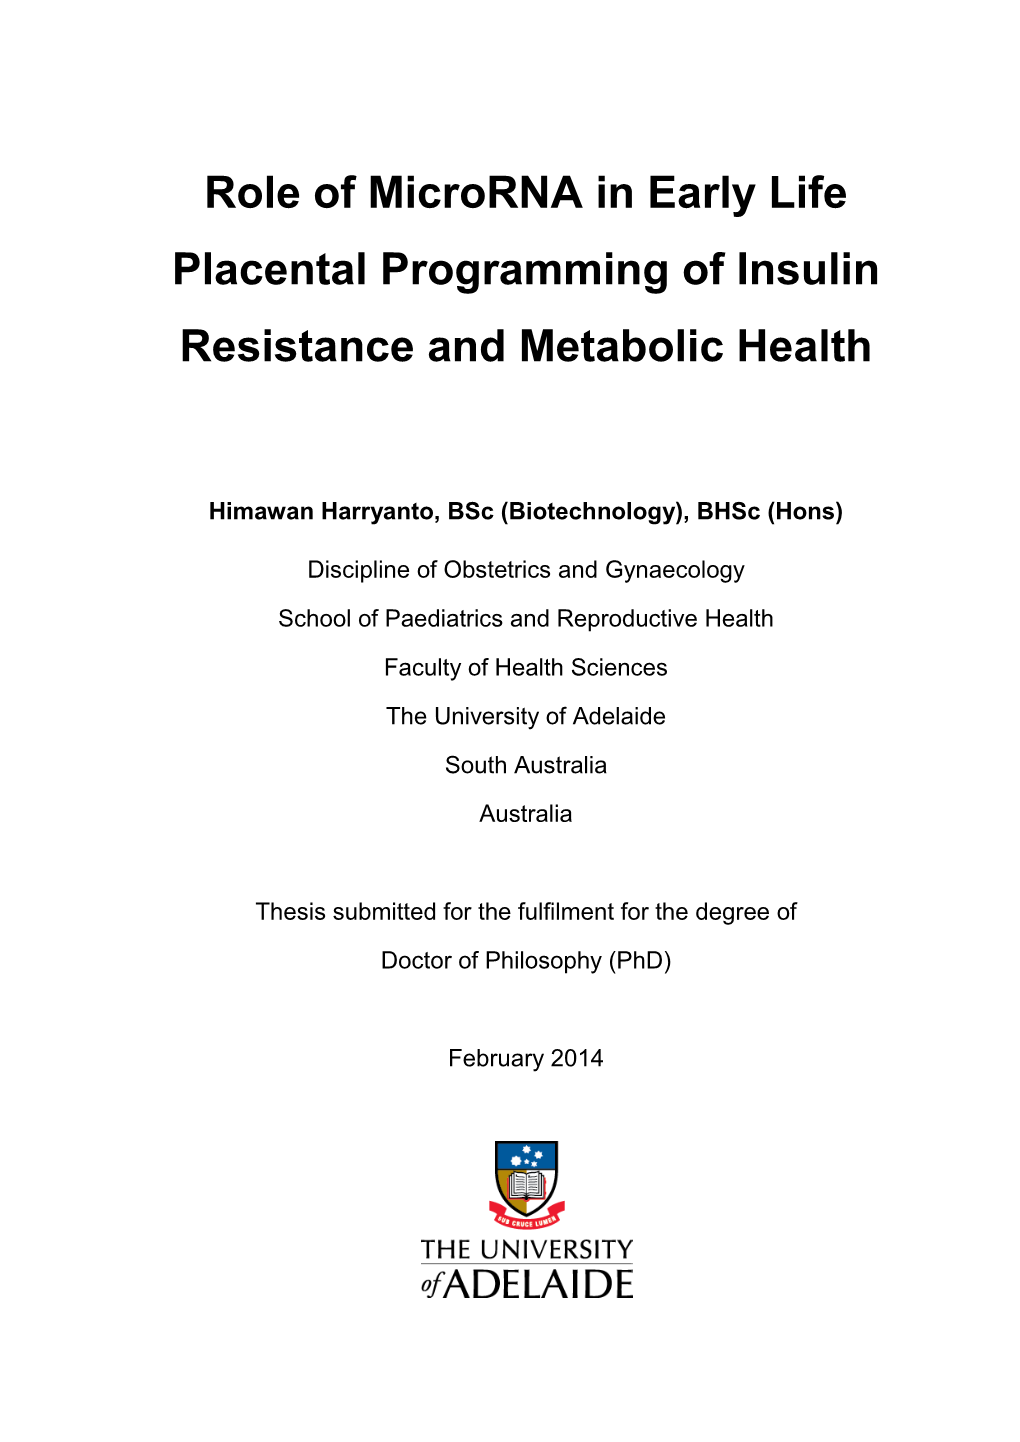 Role of Microrna in Early Life Placental Programming of Insulin Resistance and Metabolic Health